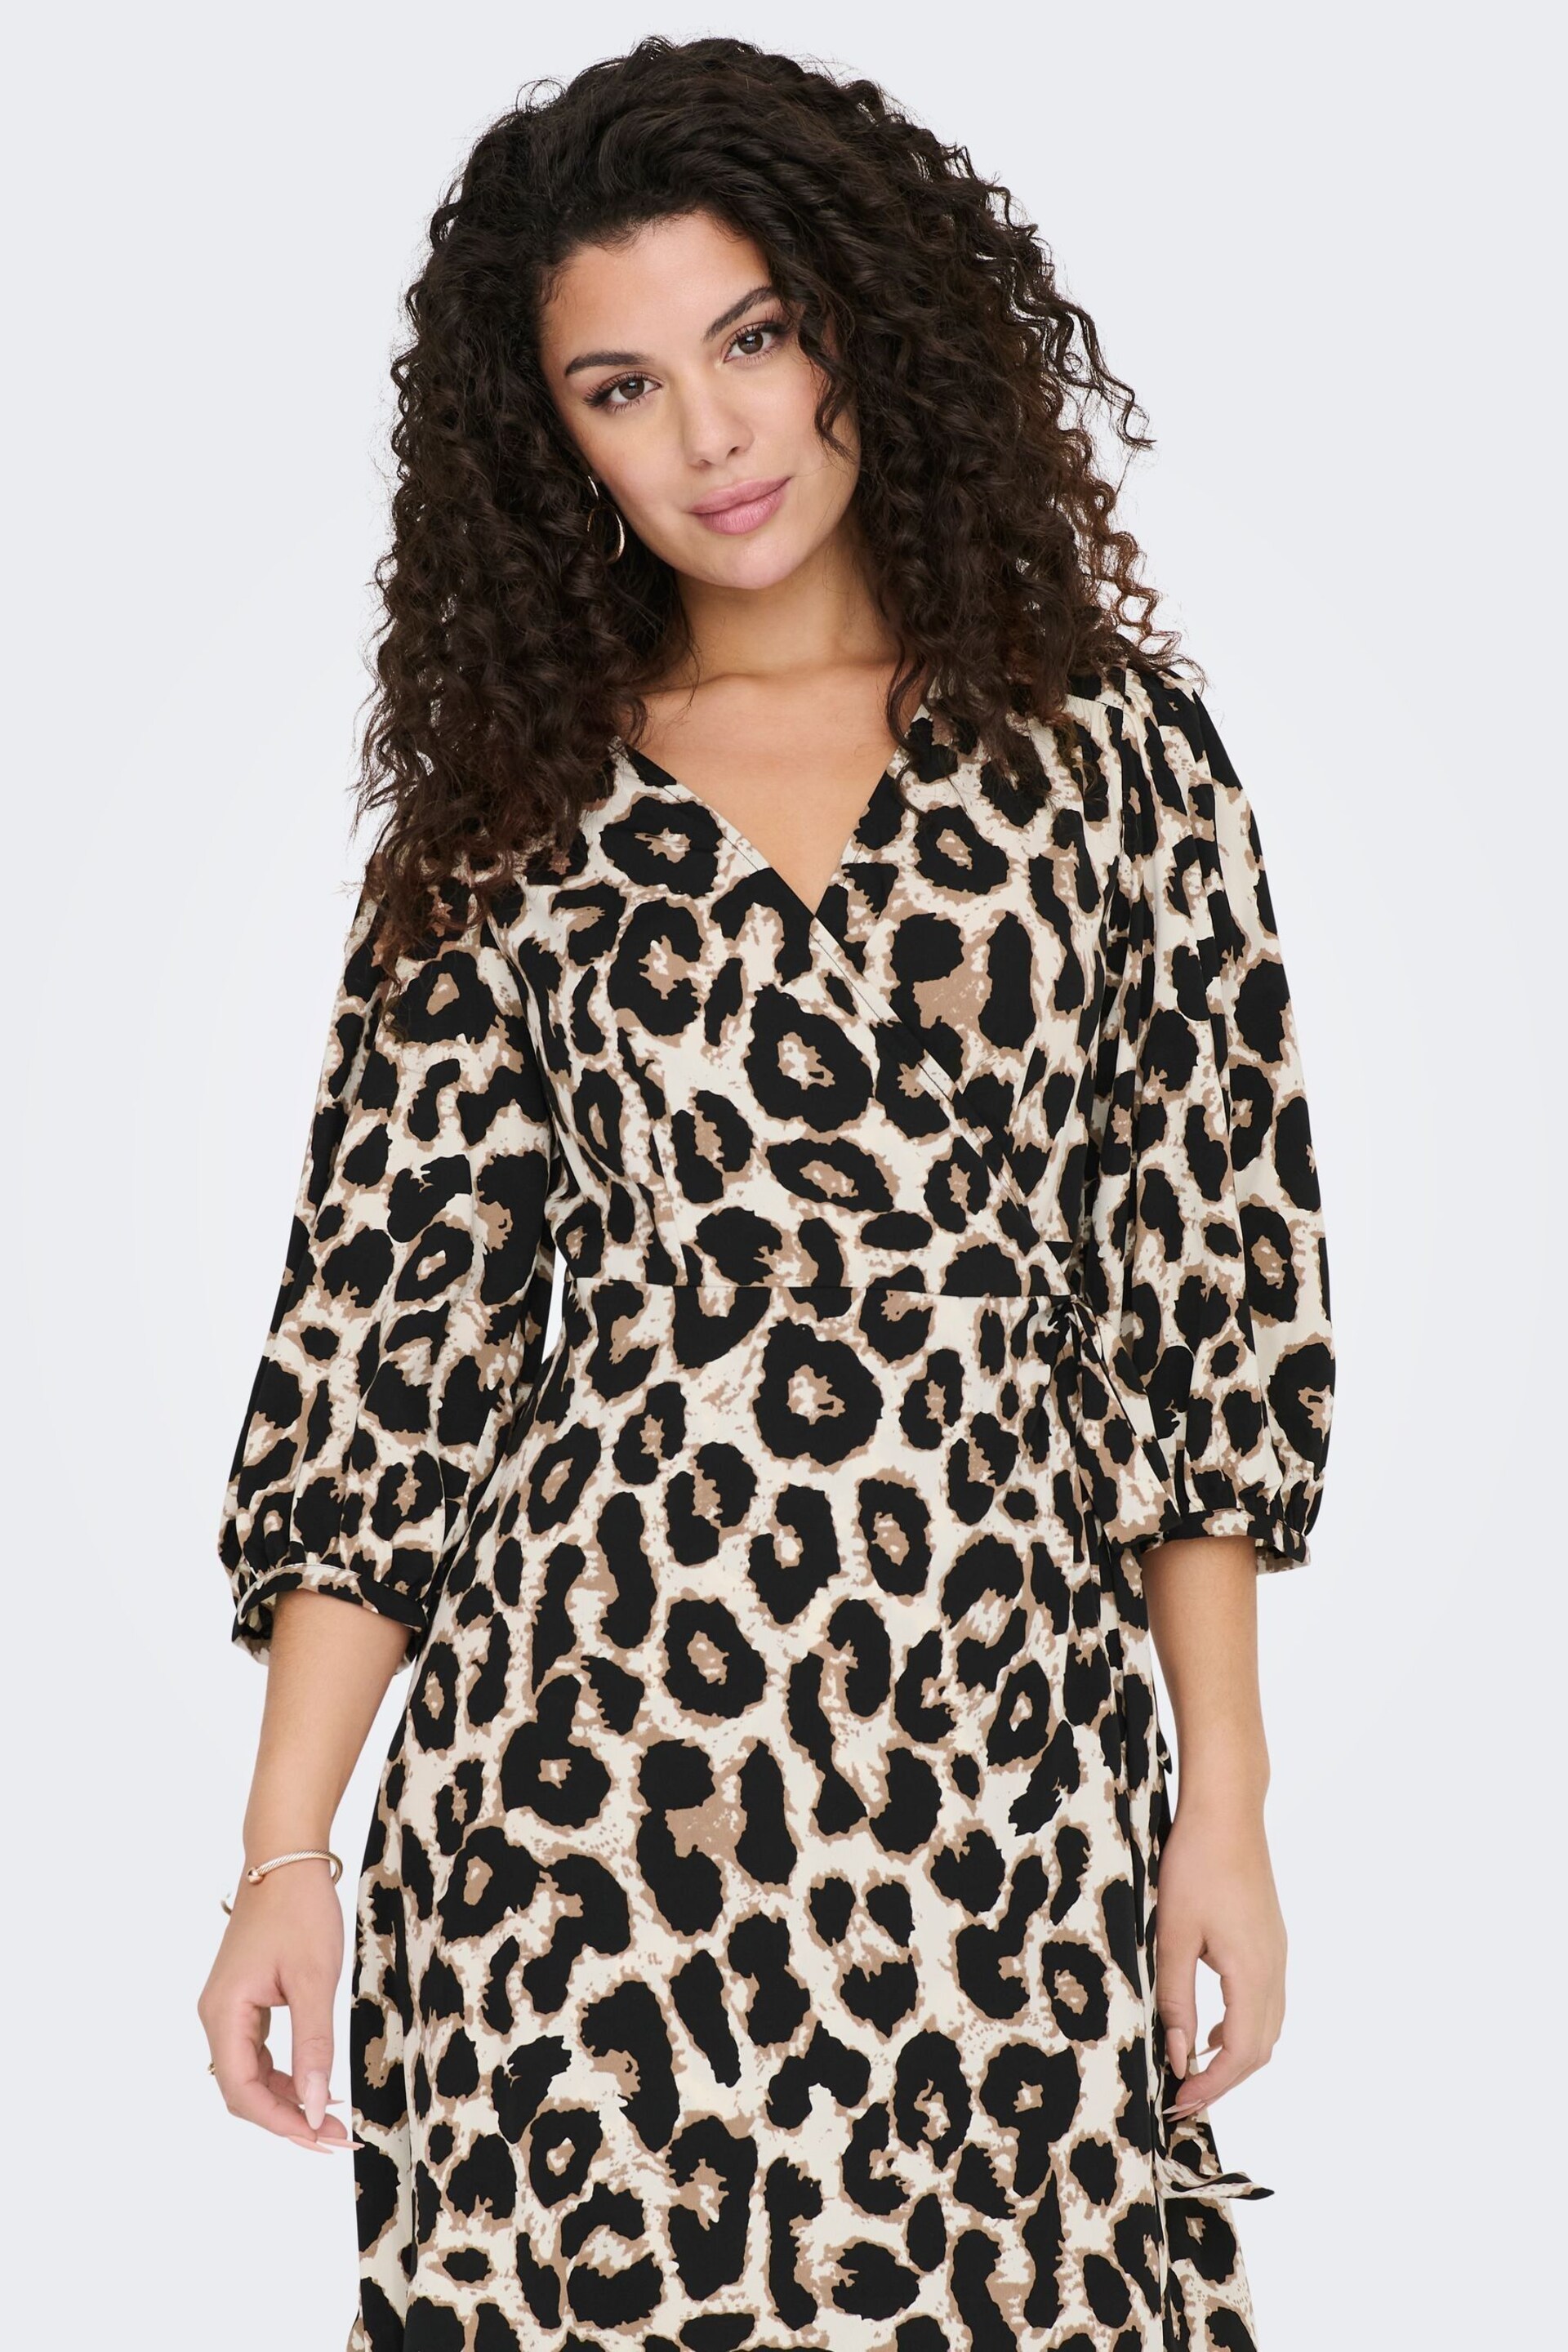 ONLY Leopard Print Long Sleeve Wrap Midi Dress - Image 2 of 5